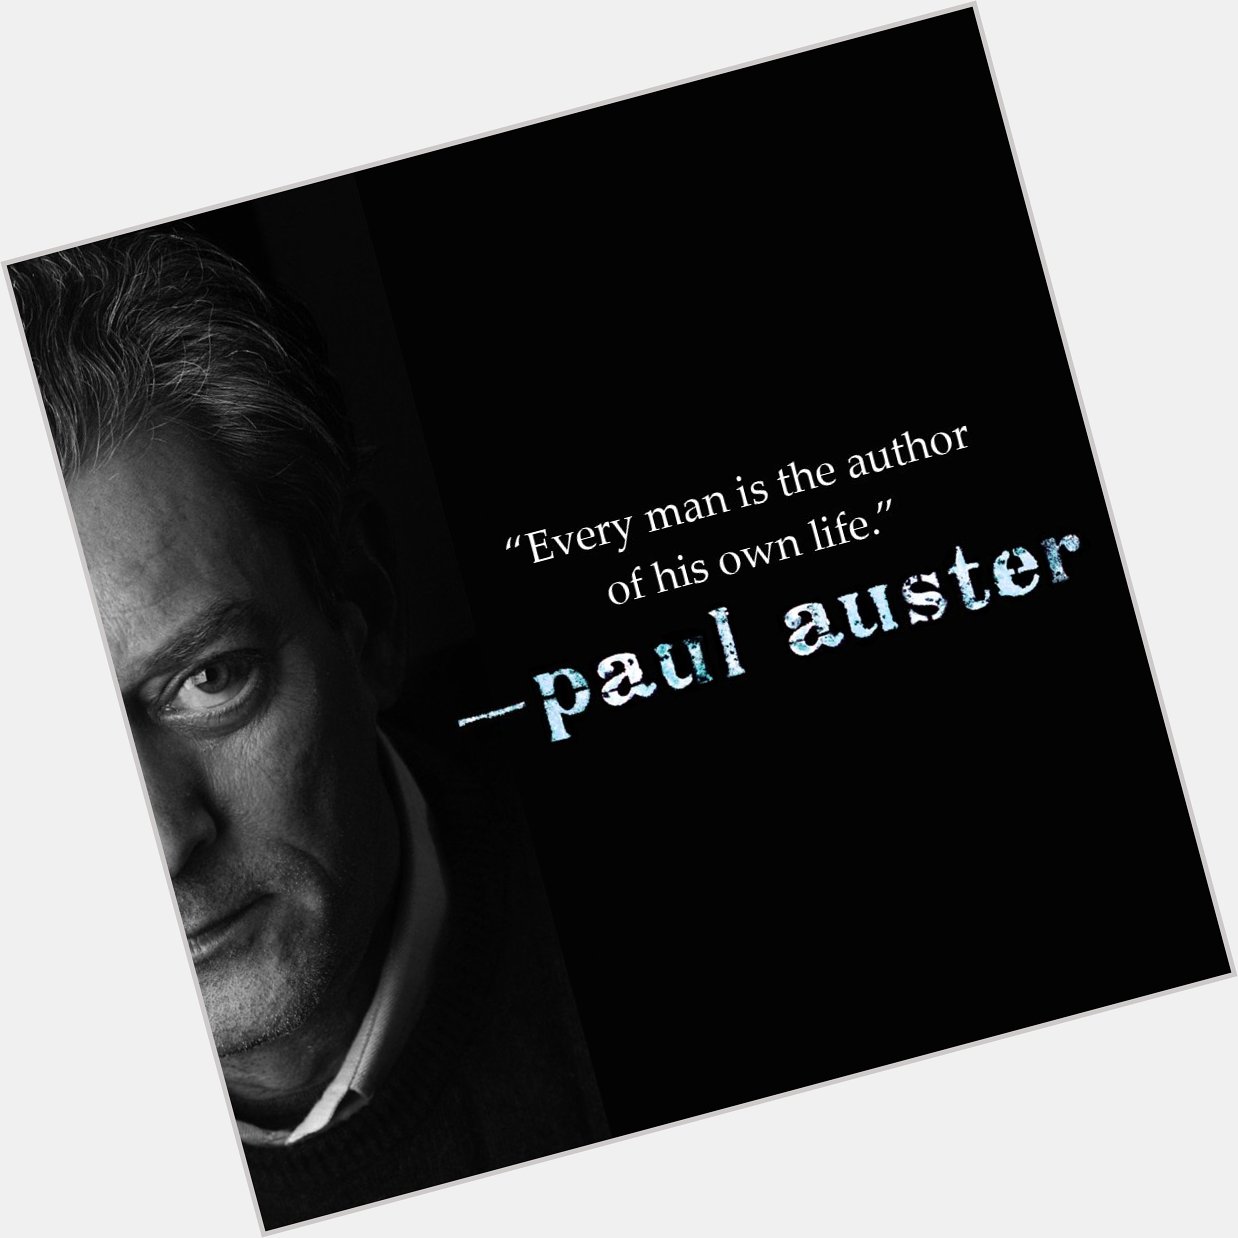 Happy Birthday to Paul Auster, truly the author of his own life. 